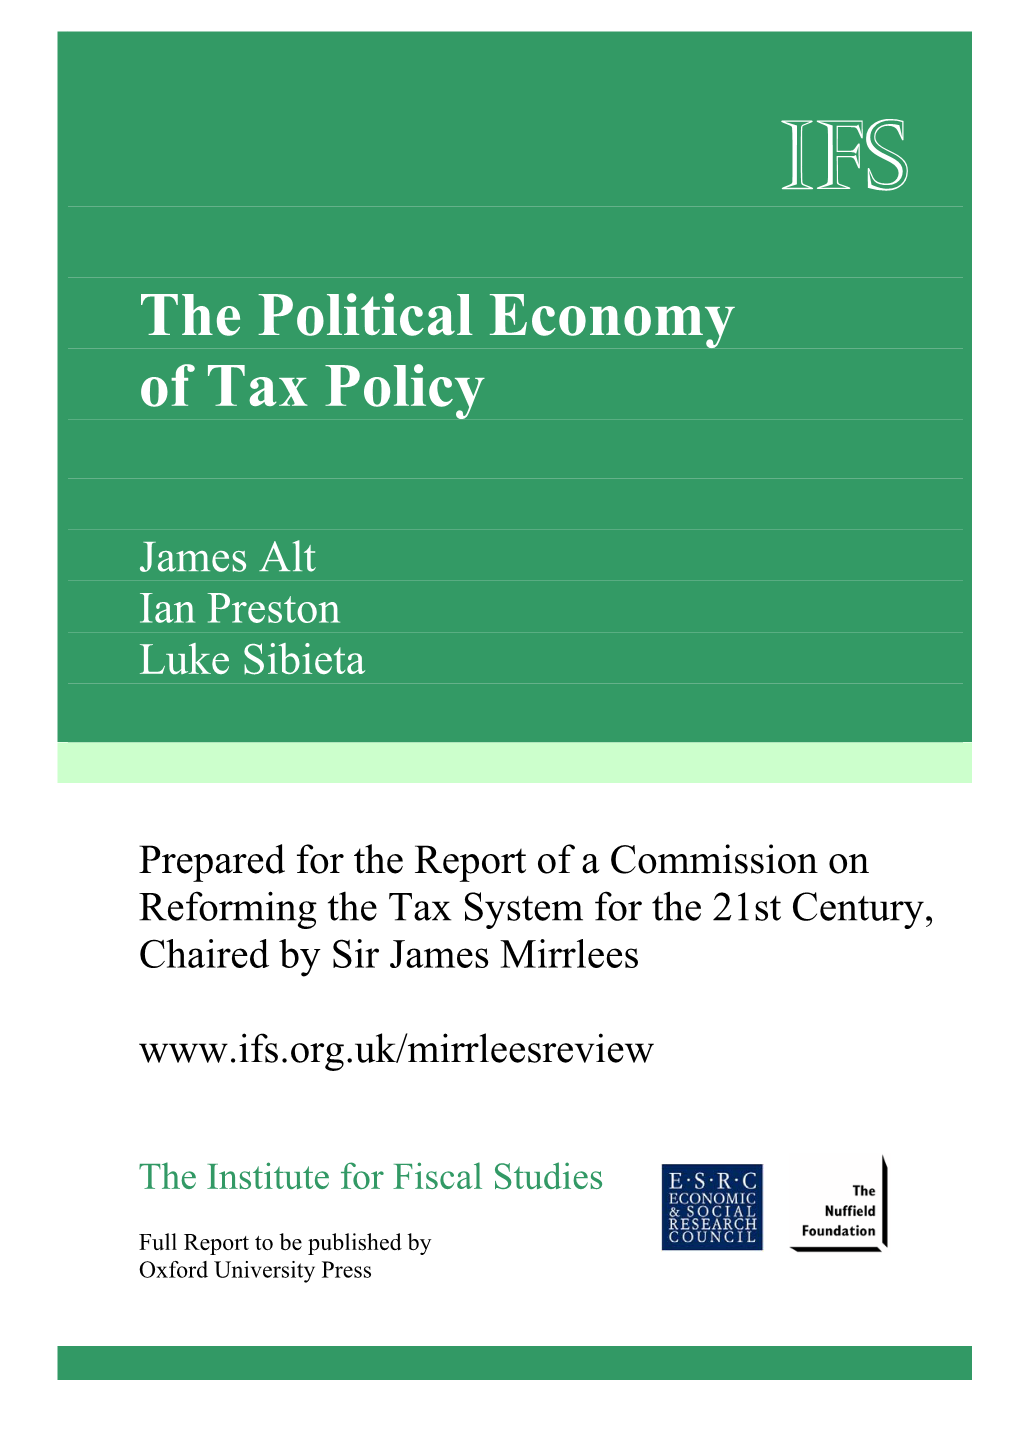 The Political Economy of Tax Policy